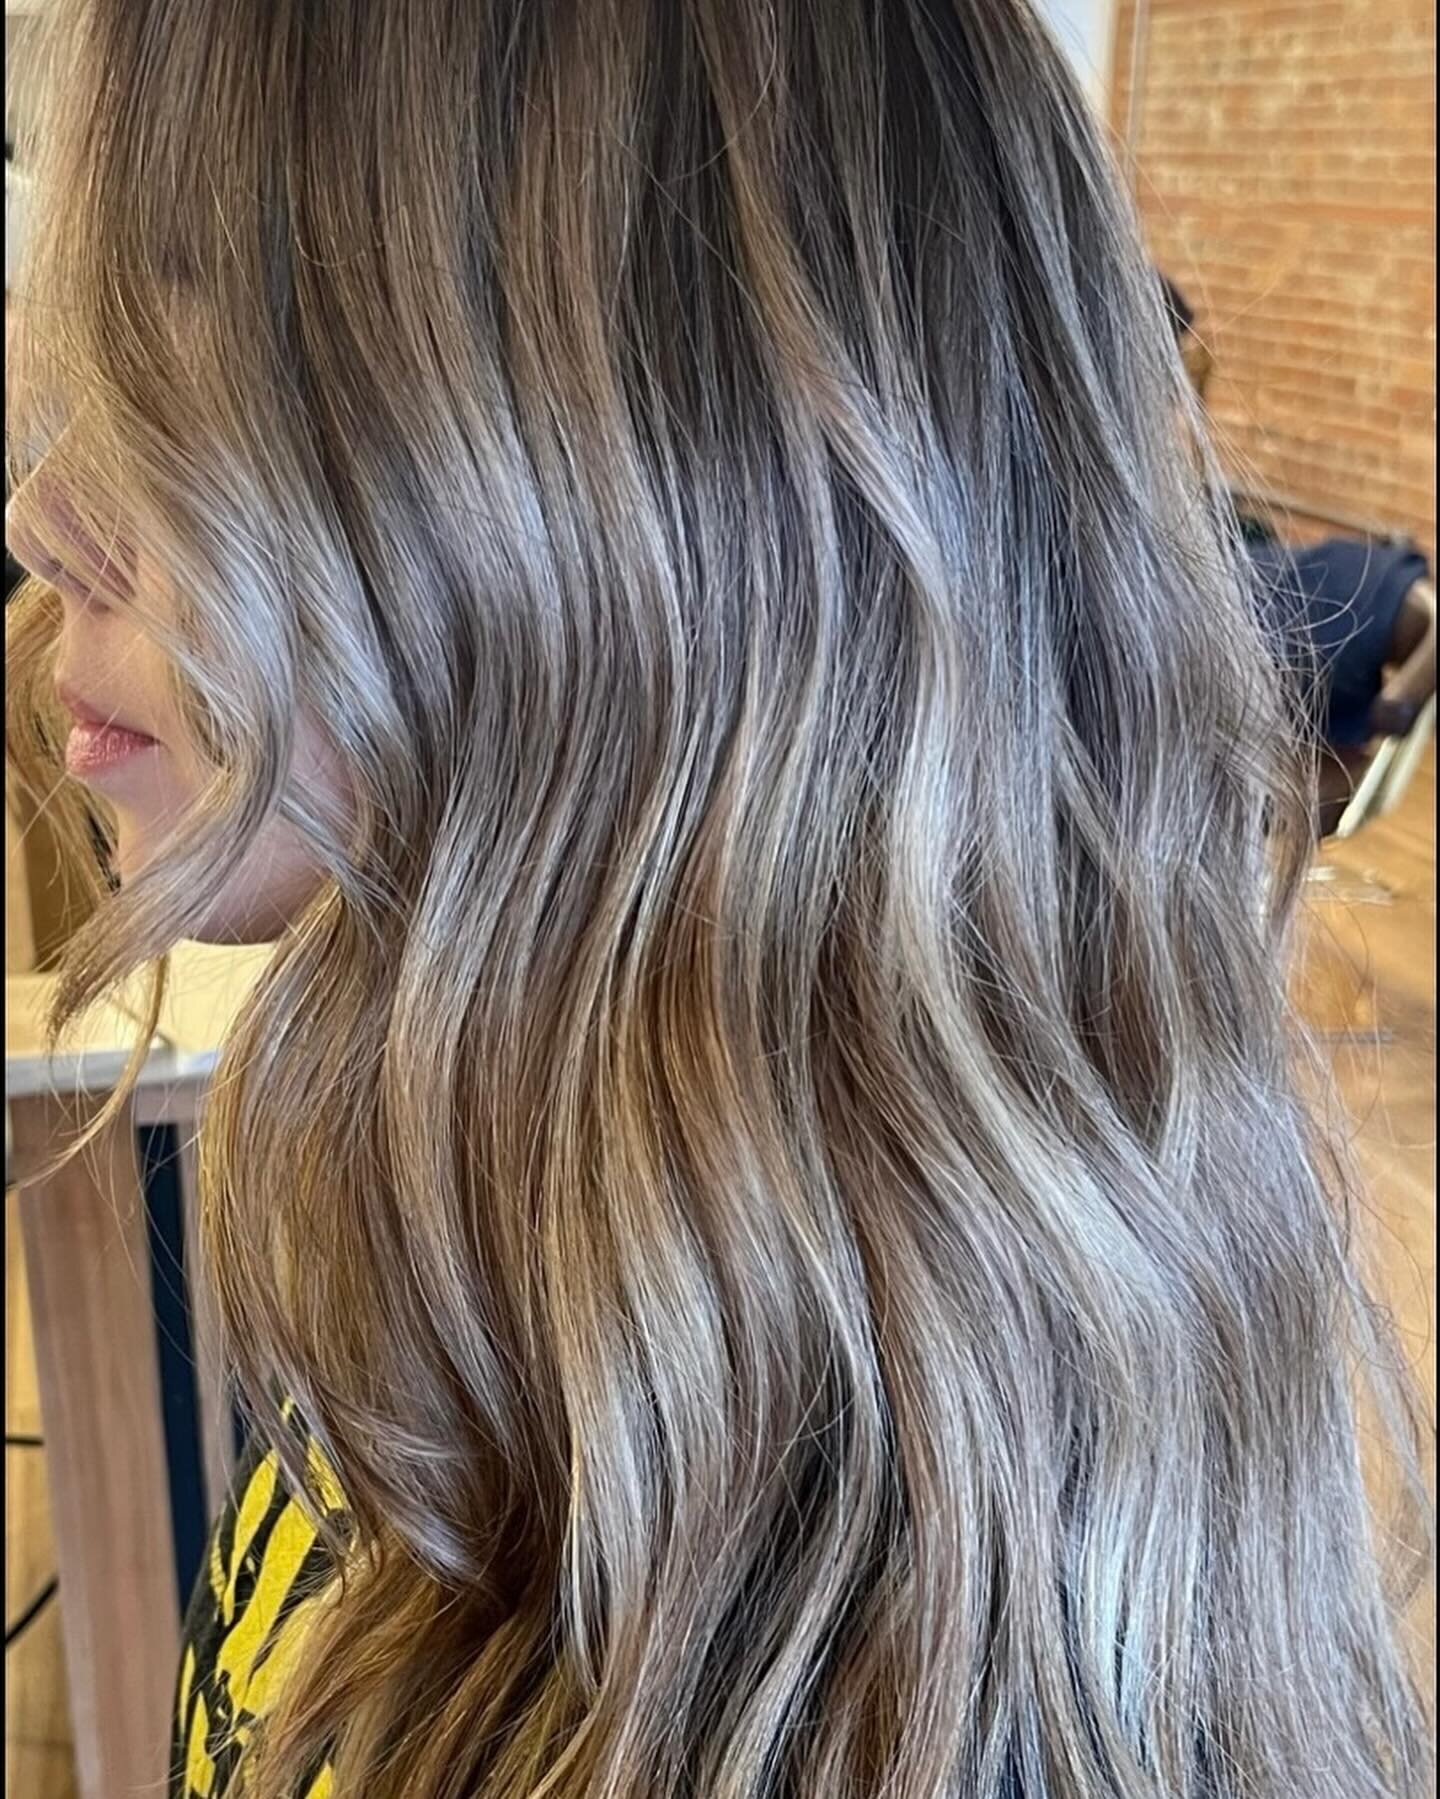 Who says winter can&rsquo;t be golden? ❄️✨ Elevate your winter style with a touch of blonde balayage &ndash; because icy days deserve a warm, sunny glow. ☀️❄️ Hair by: @juquilina_latuabella  #BlondeInWinter #WinterSunshineHair